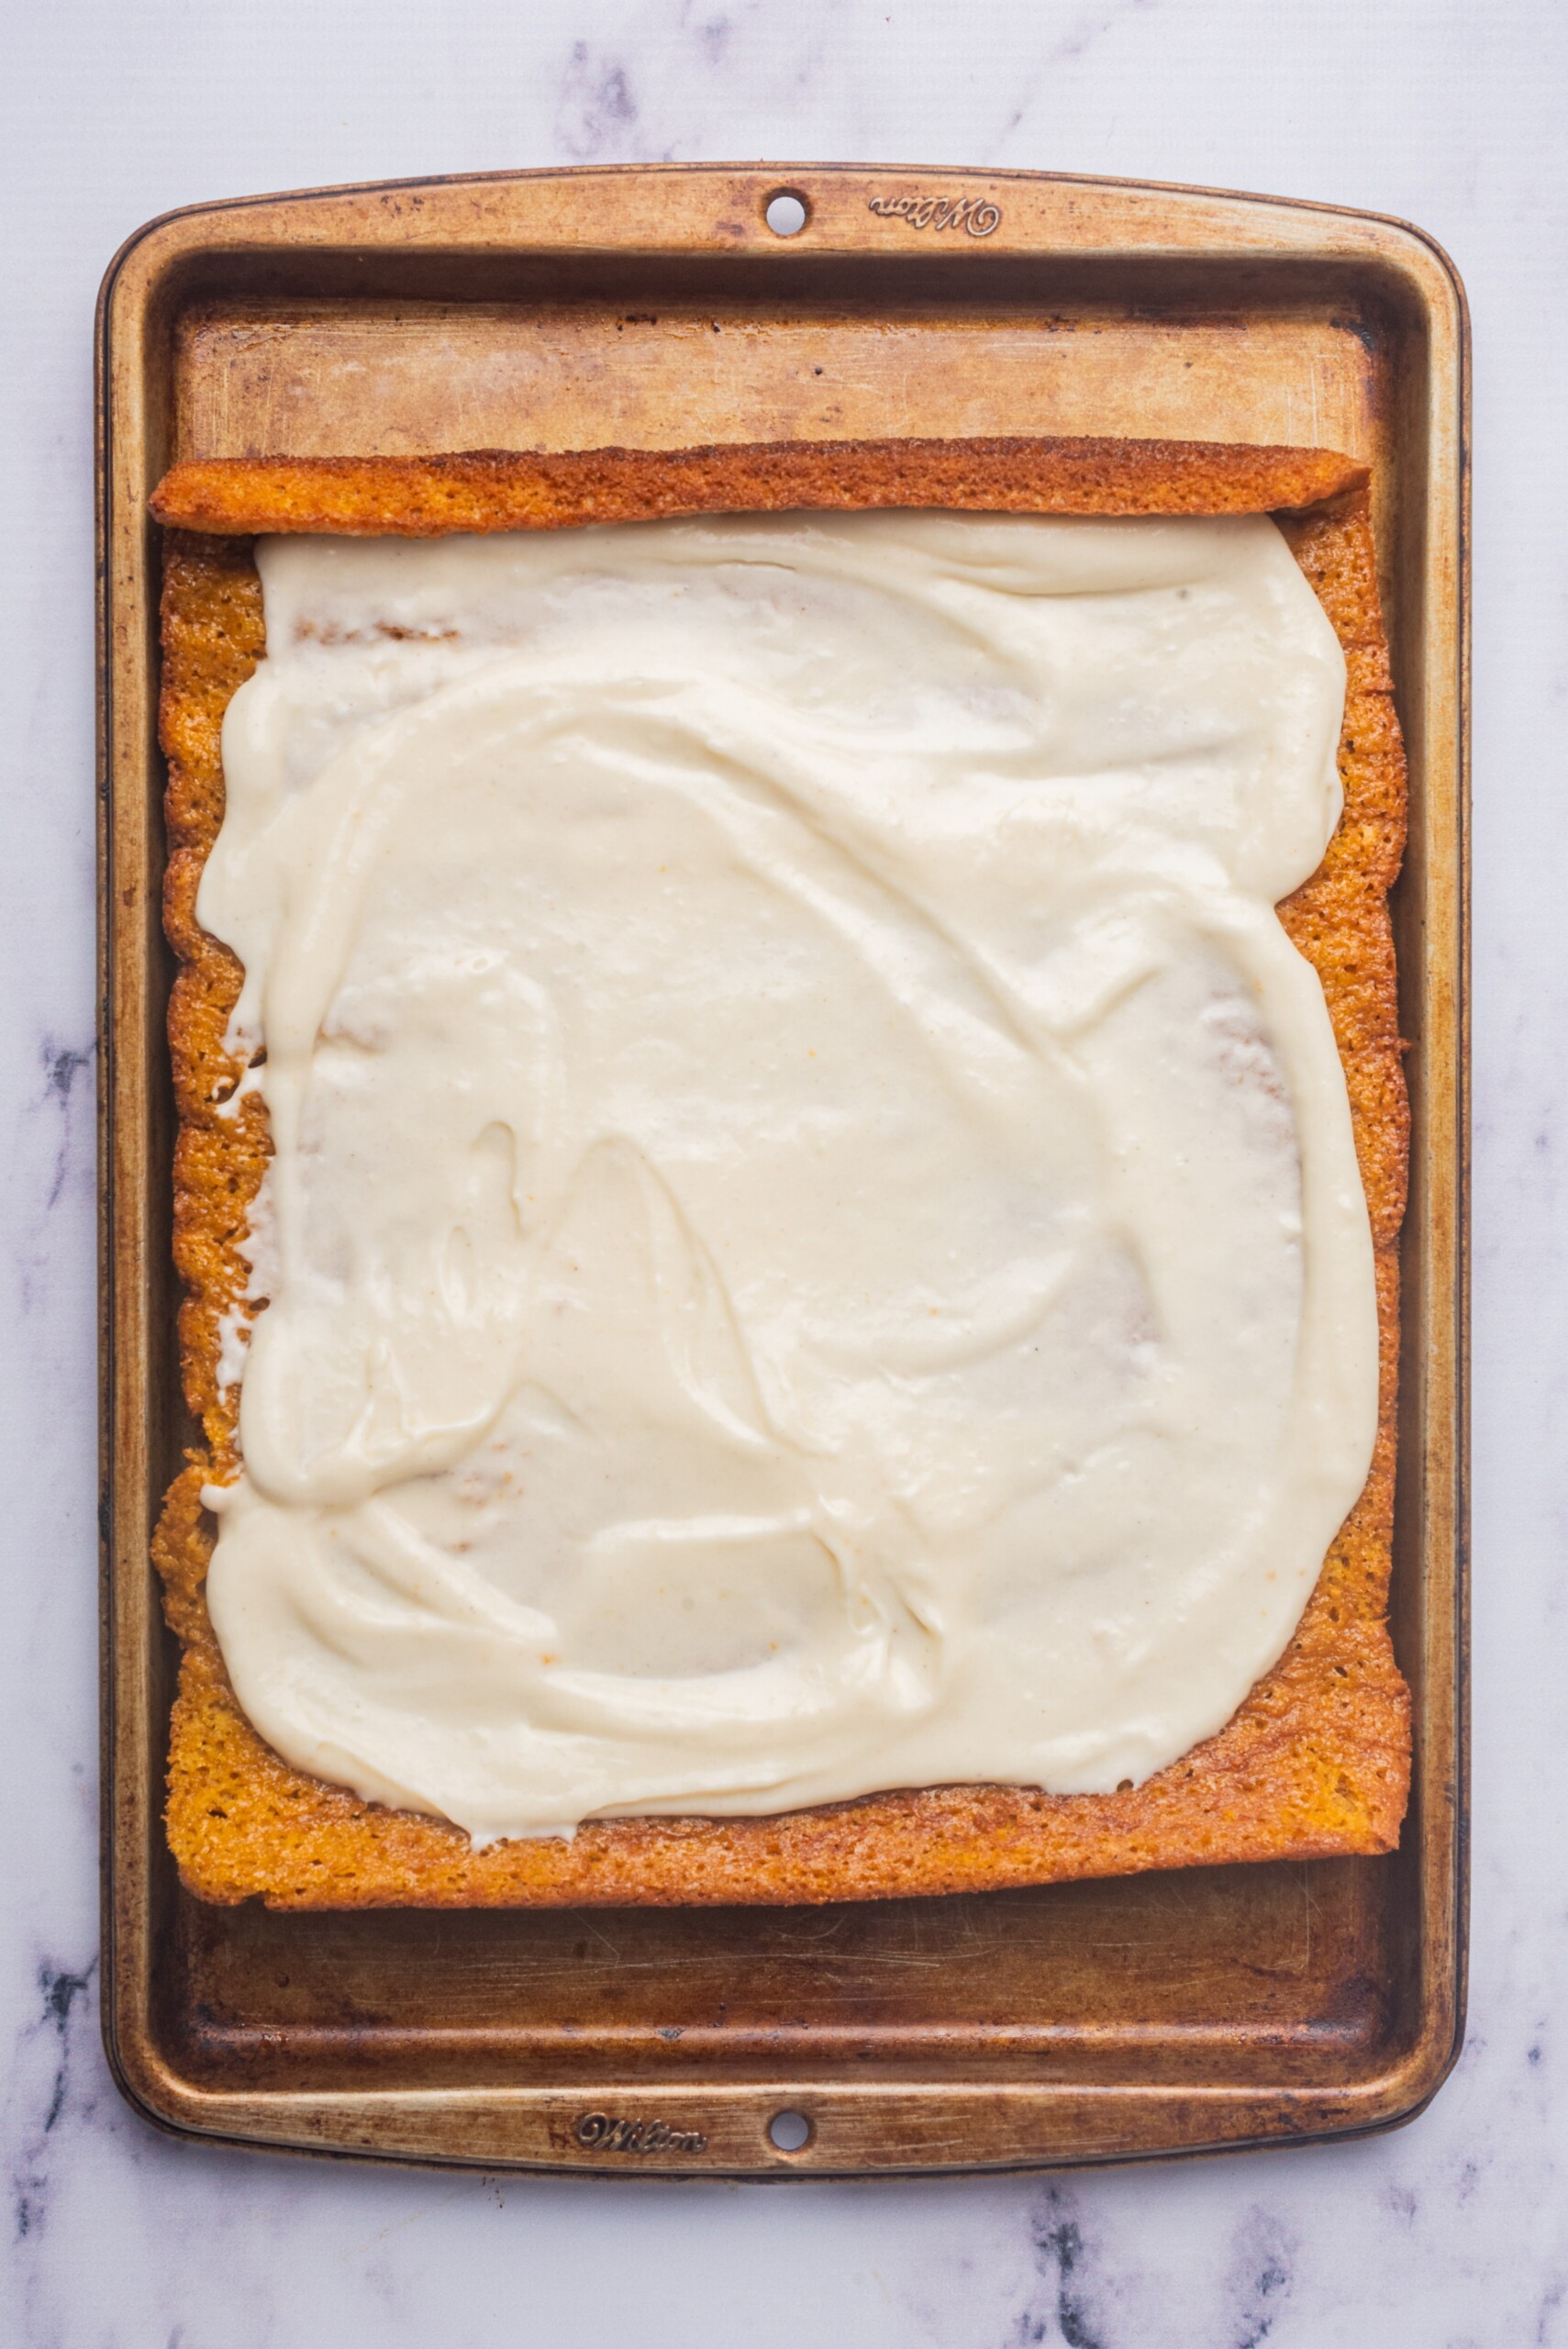 Baked pumpkin roll unrolled and covered with a layer of cream cheese filling on a baking tray.